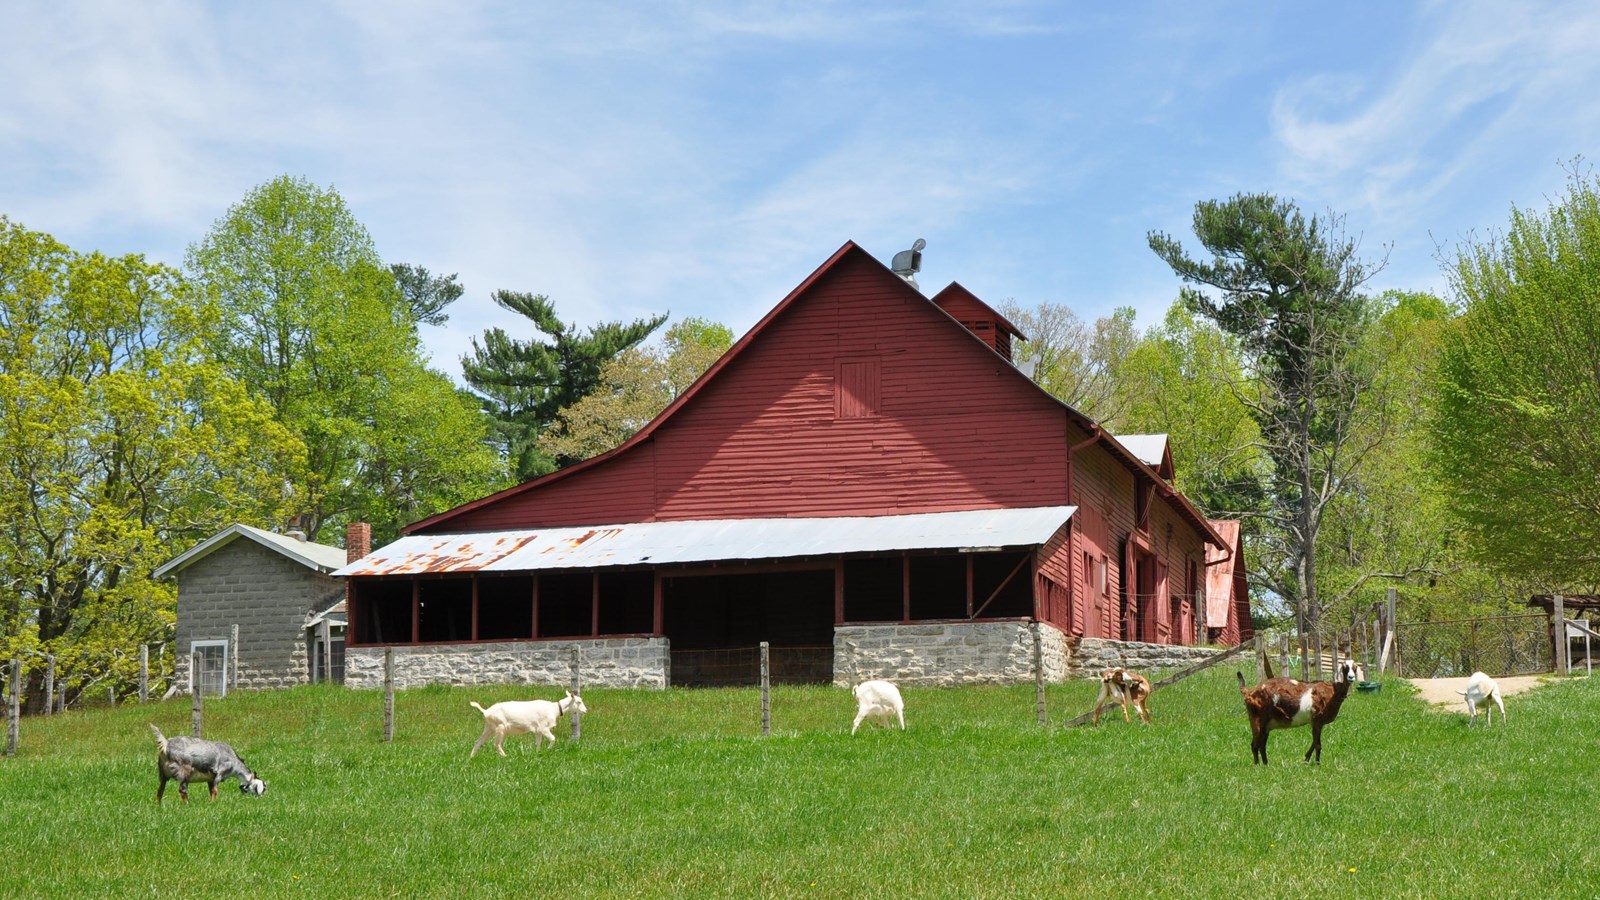 A red barn sits on a hill surrounded by green pastures and grazing goats